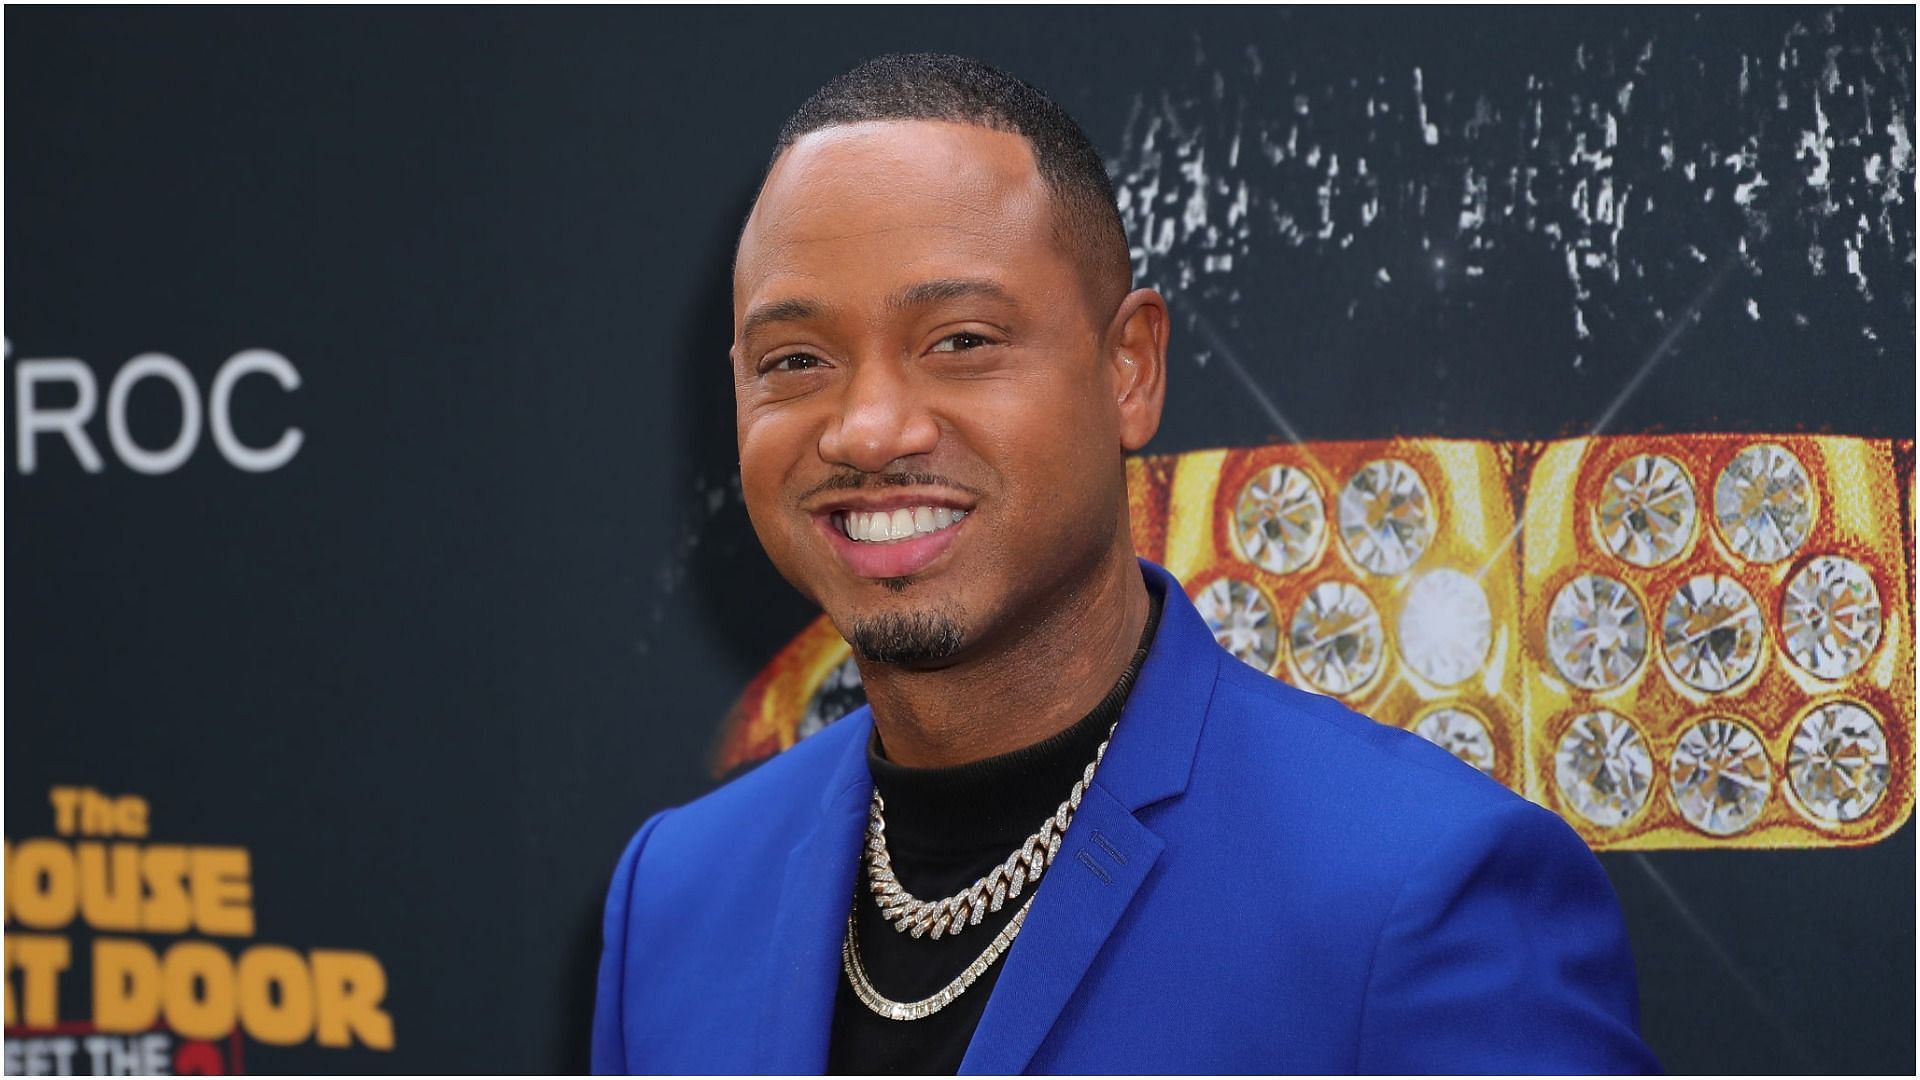 Terrence J. attends the Black Carpet Premiere of Hidden Empire&#039;s new film &quot;The House Next Door: Meet the Blacks 2&quot; at Regal LA Live: A Barco Innovation Center on June 07, 2021, in Los Angeles, California (Image via Getty Images)